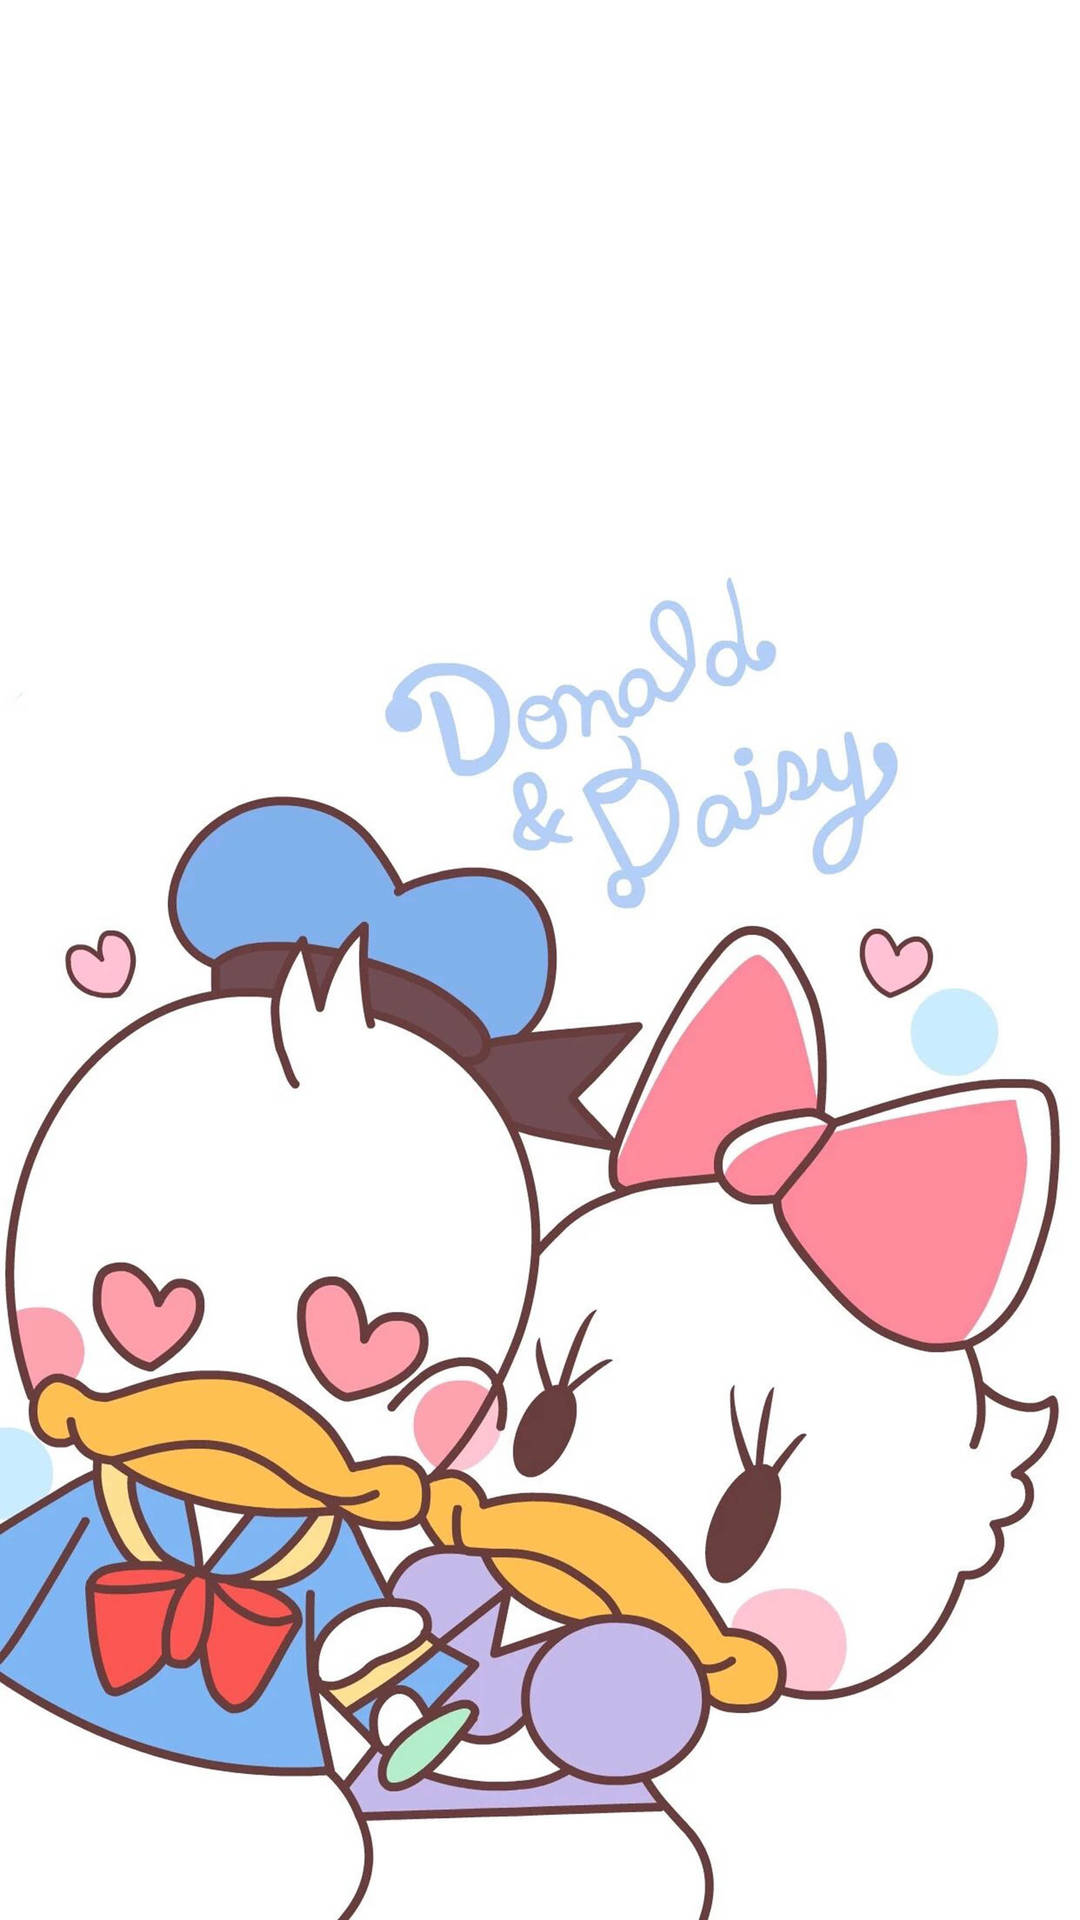 Adorable Donald Duck And Daisy Wallpaper